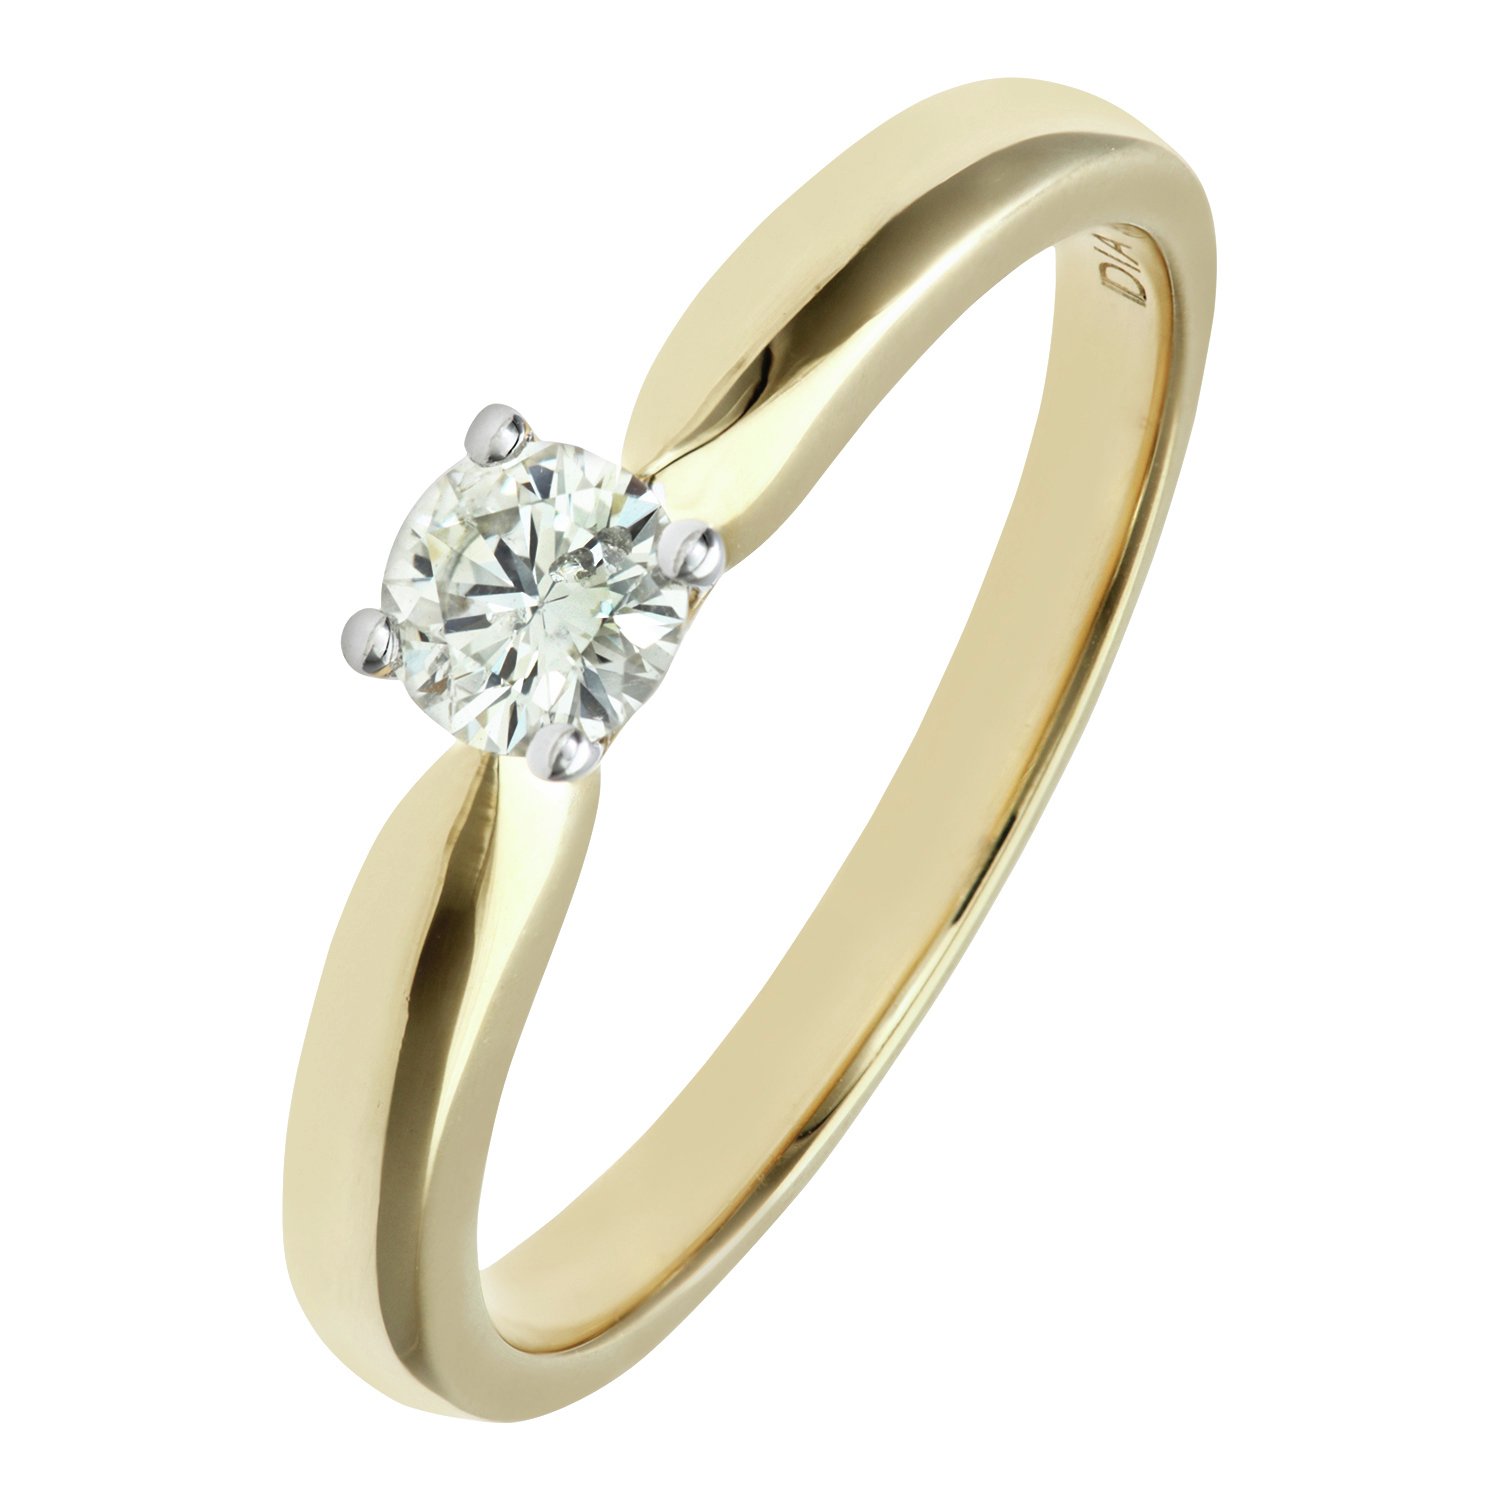 Everlasting Love 9ct Gold Diamond Solitaire Ring - Size O